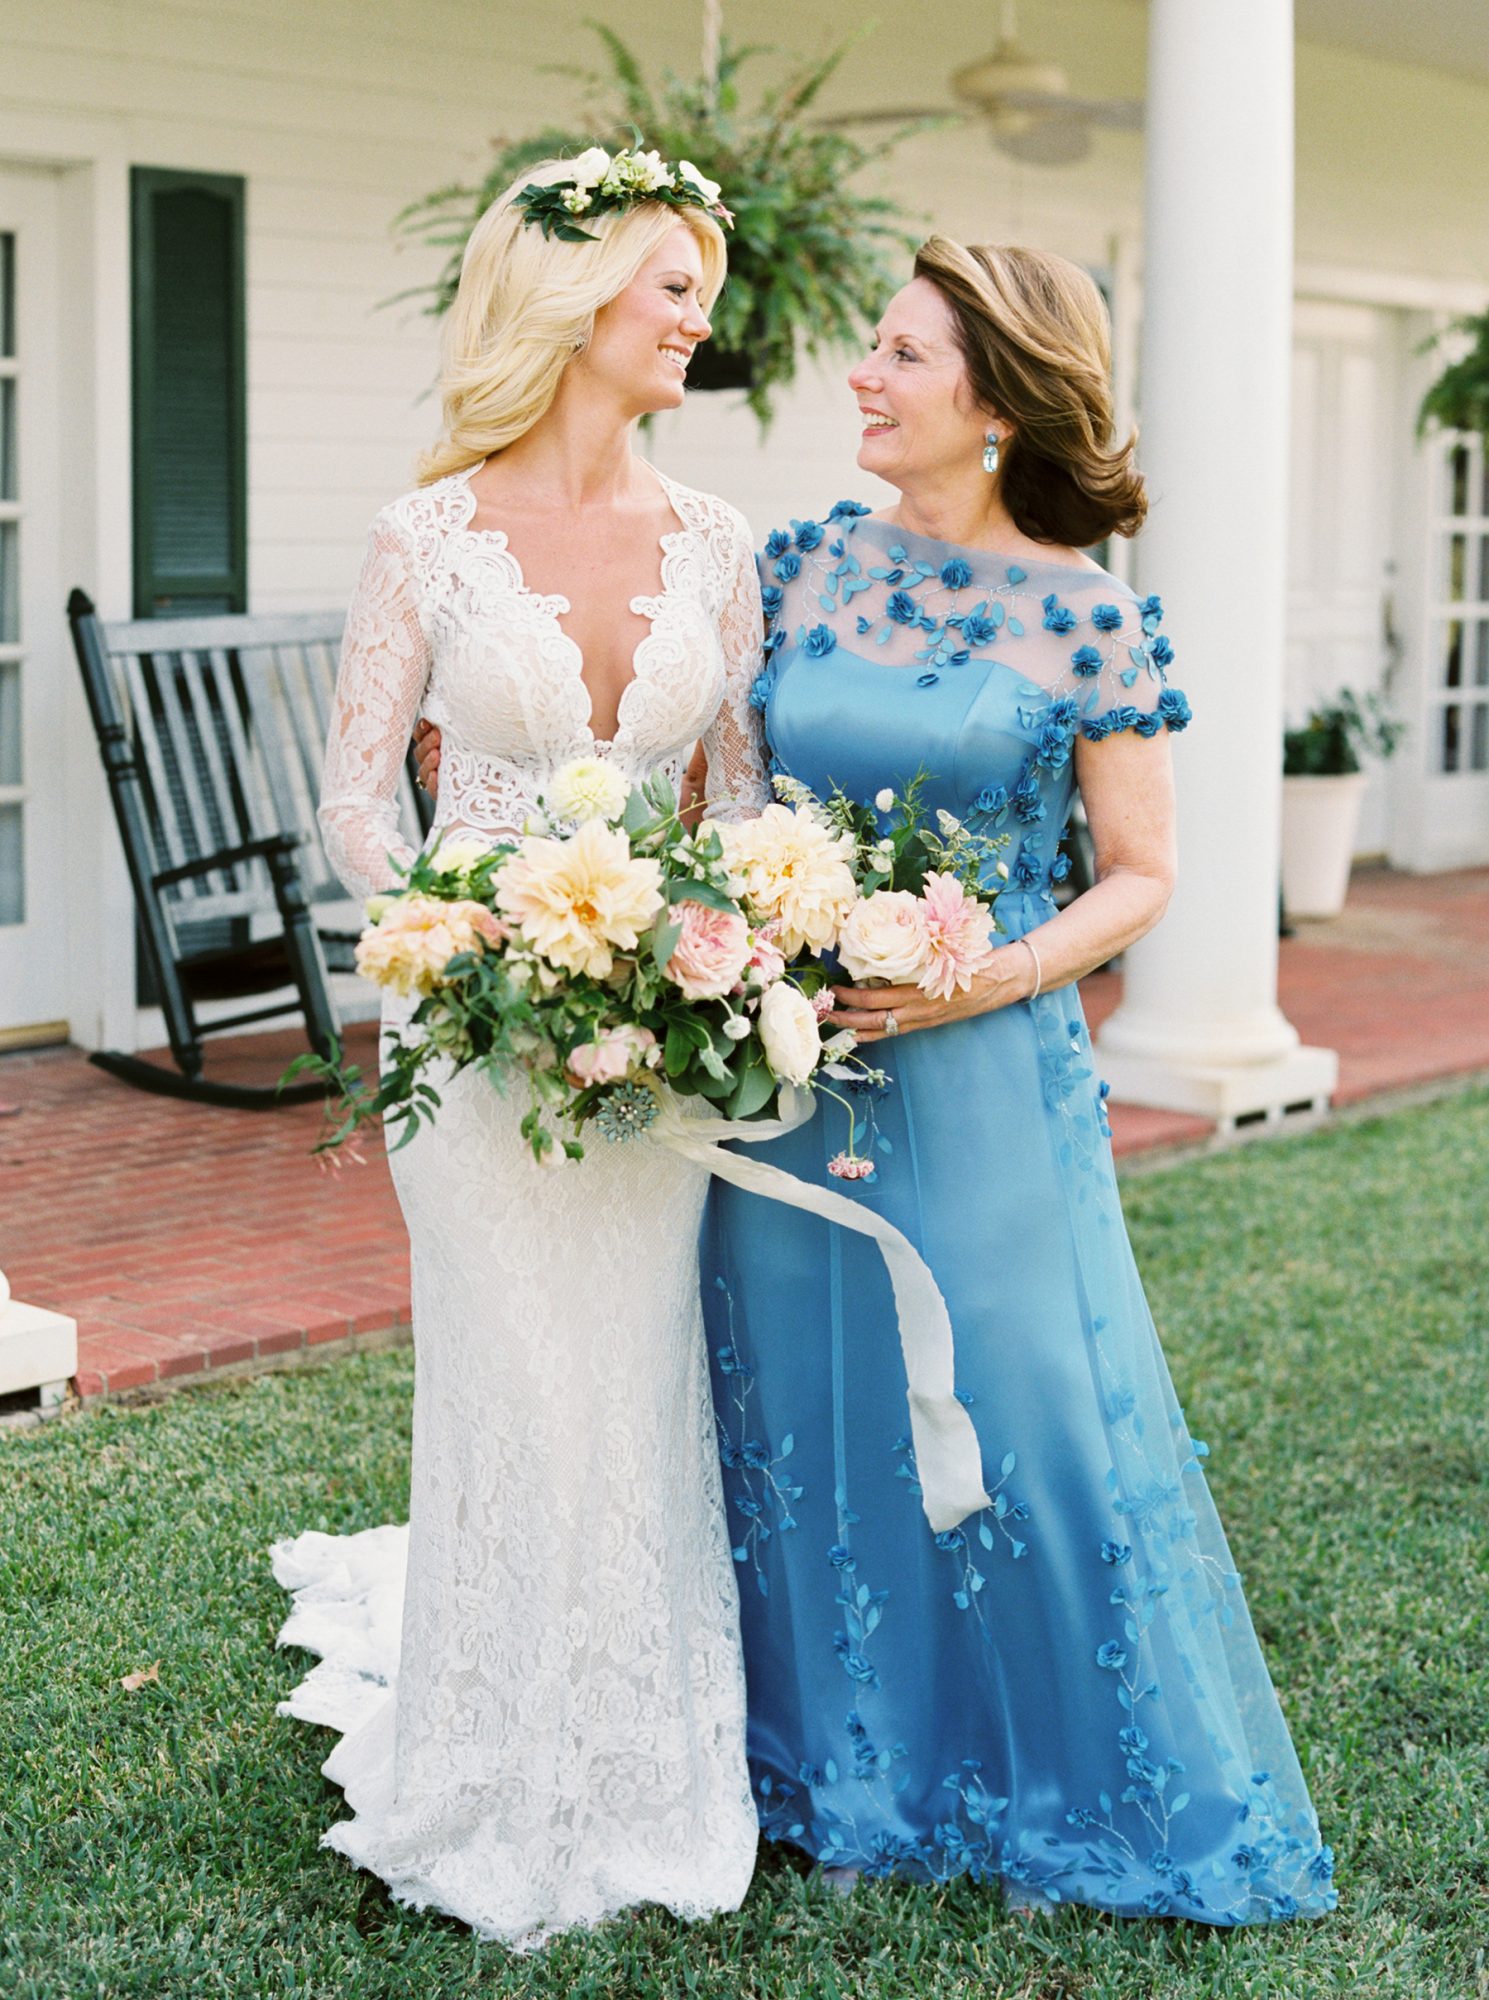 Mother of the Bride wear blue flower dress and the bridal wear a long sleeves wedding dress